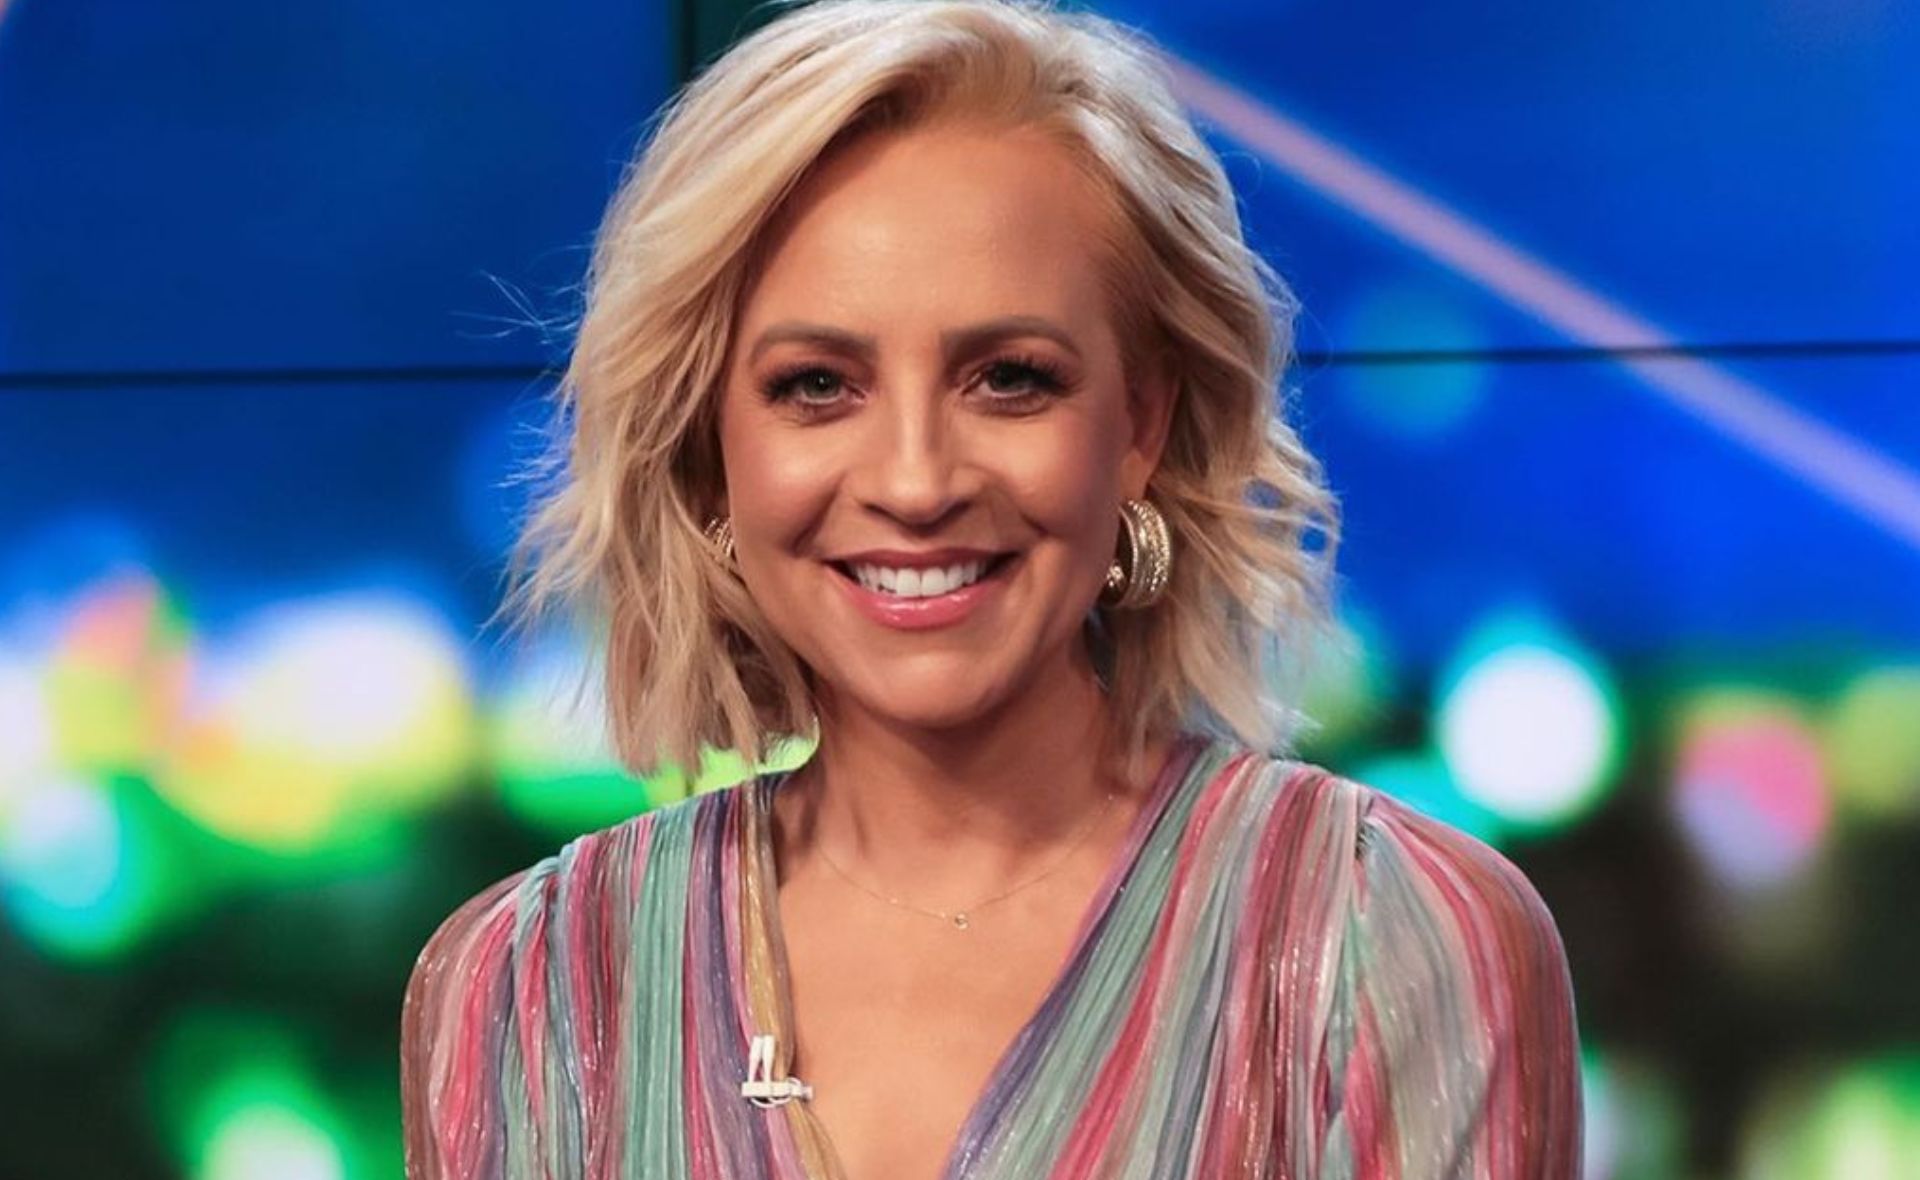 Carrie Bickmore shares a jaw-dropping throwback of the original 7pm Project team